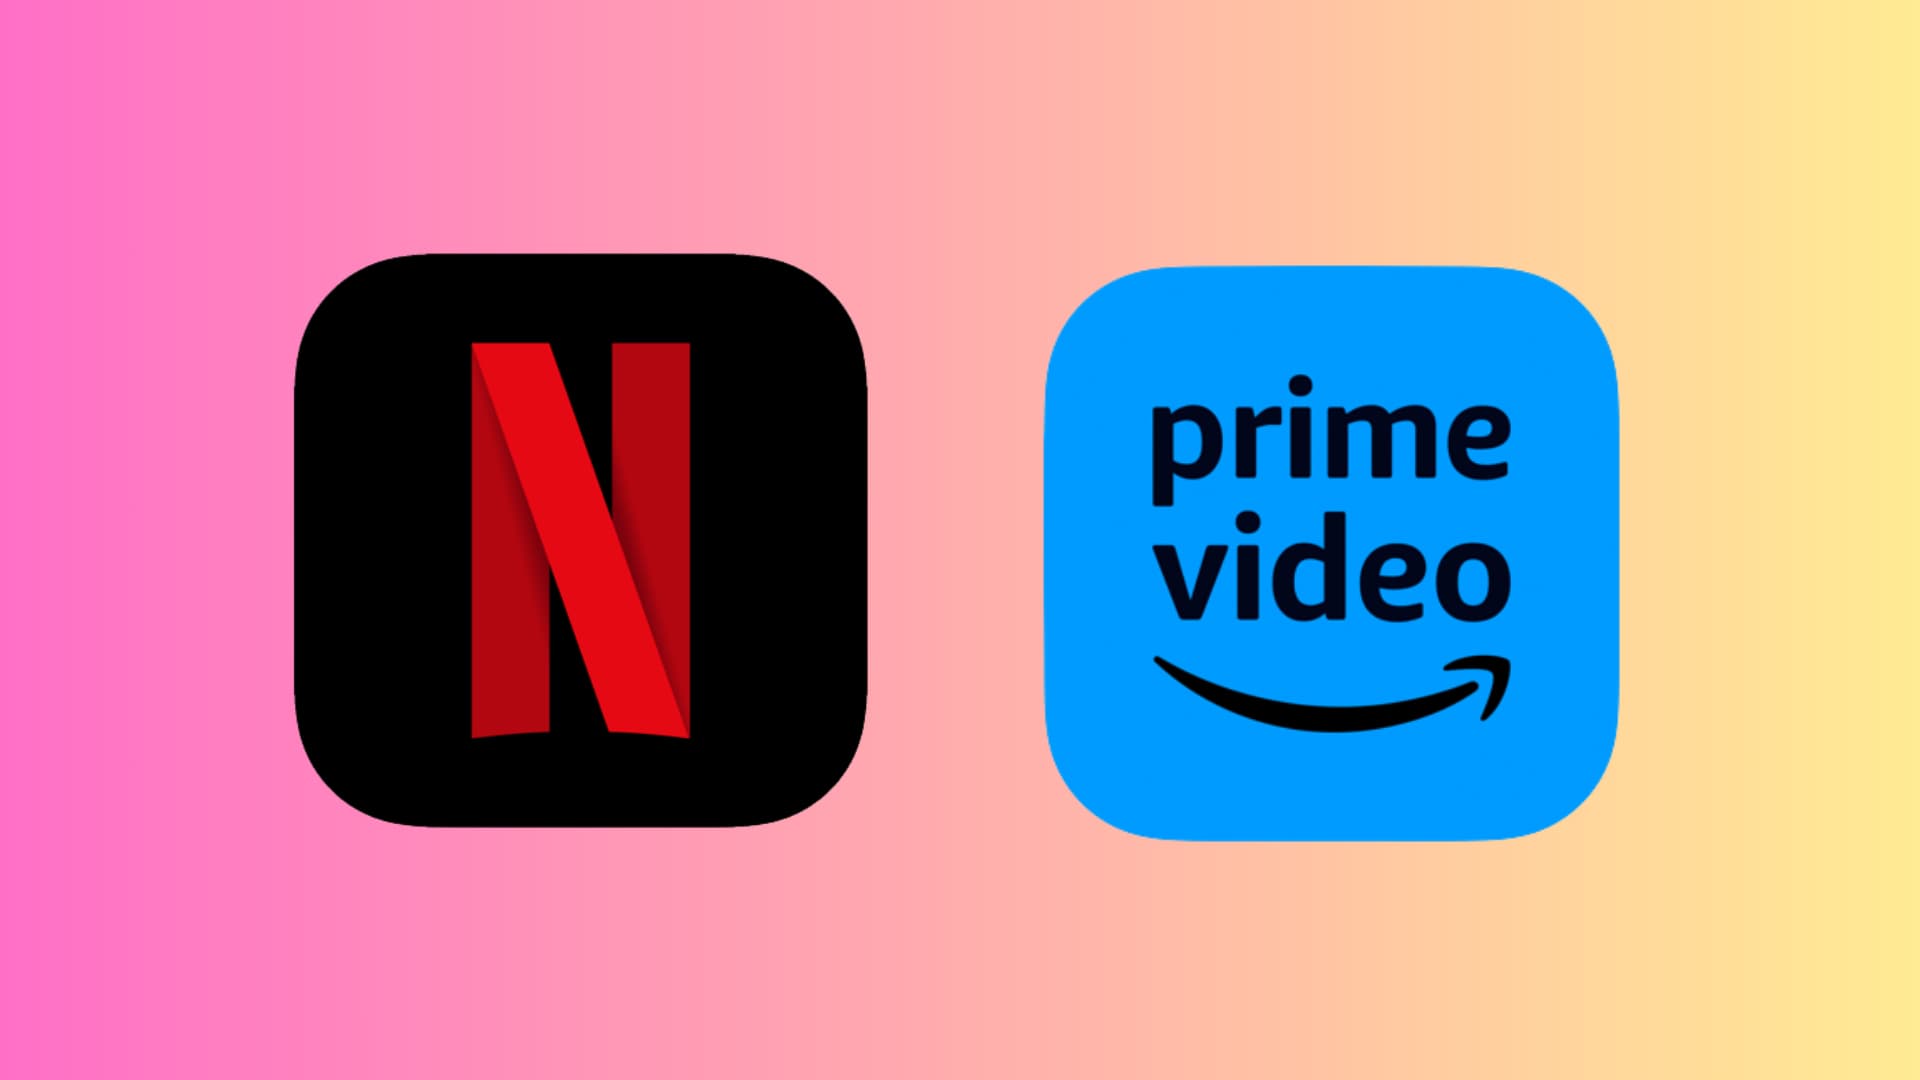 Netflix and Prime Video app icons